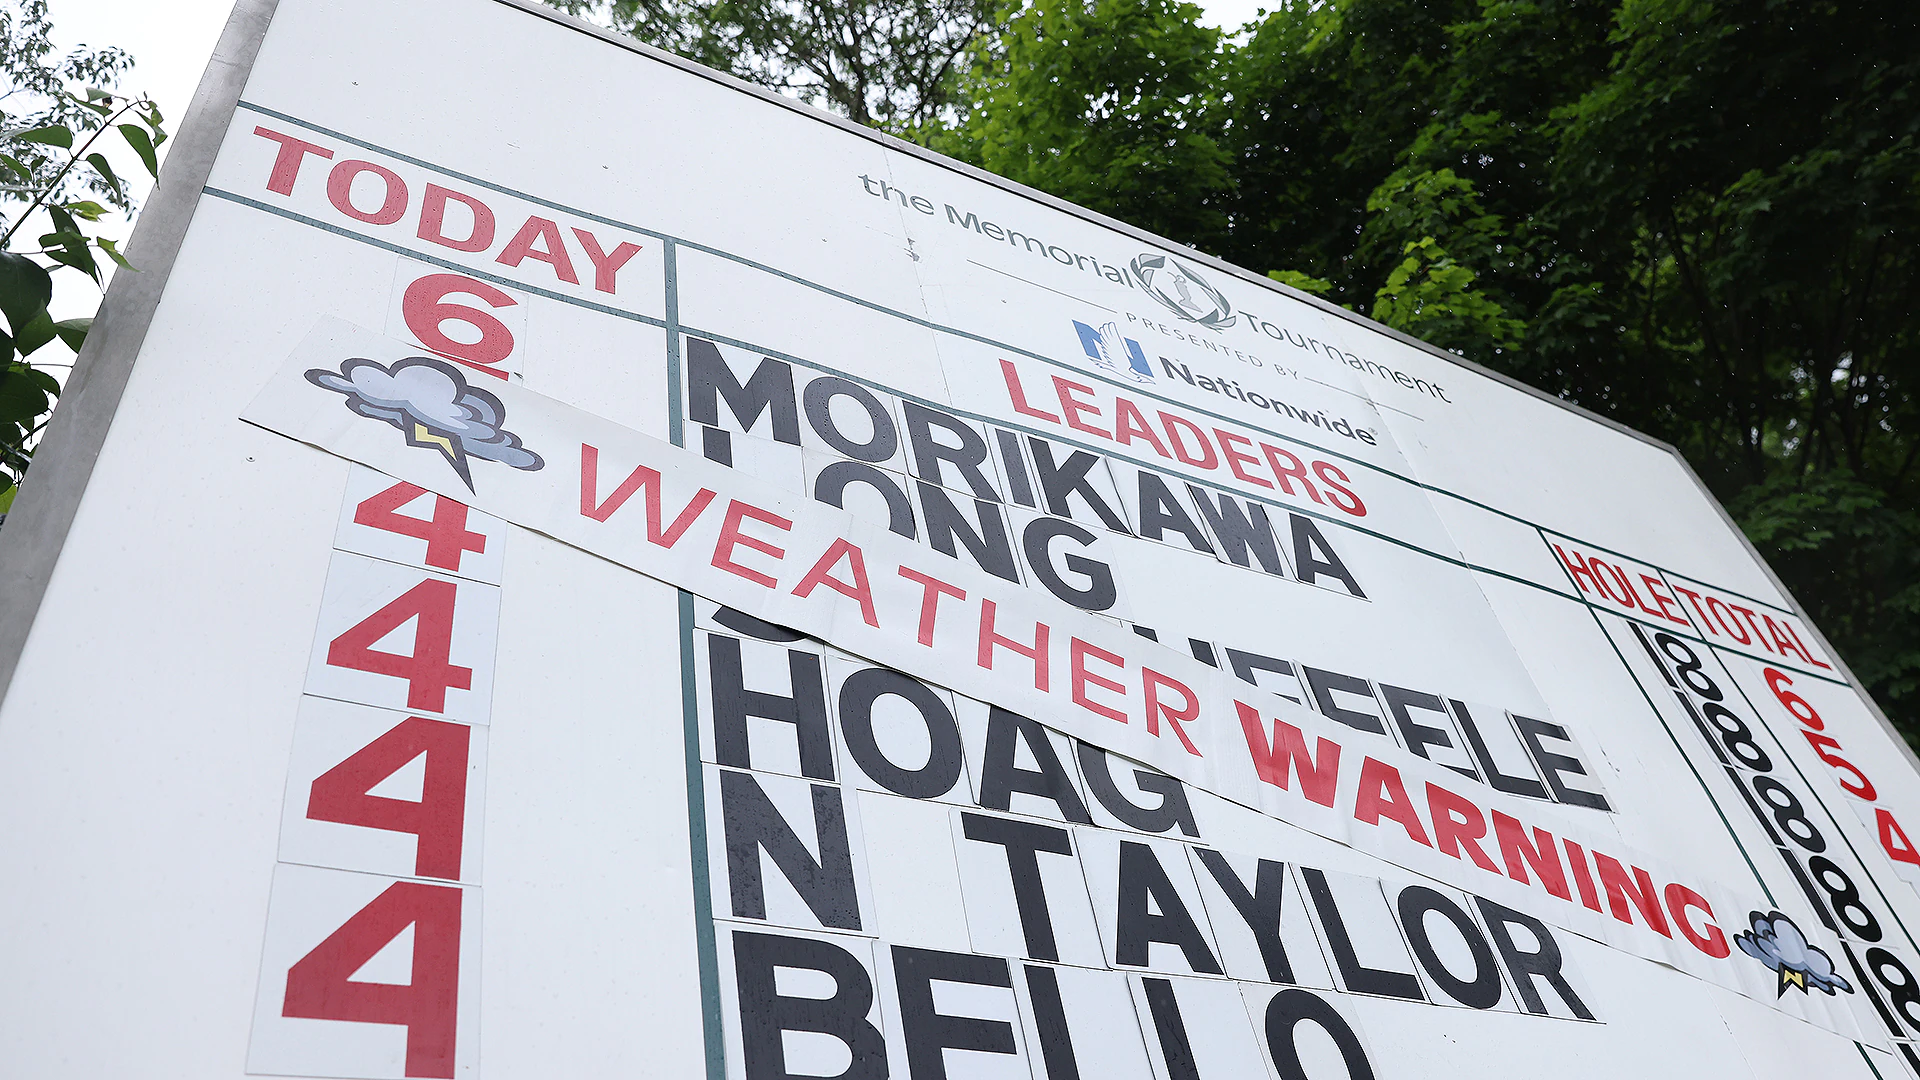 After multiple delays, Round 1 of Memorial Tournament suspended for day